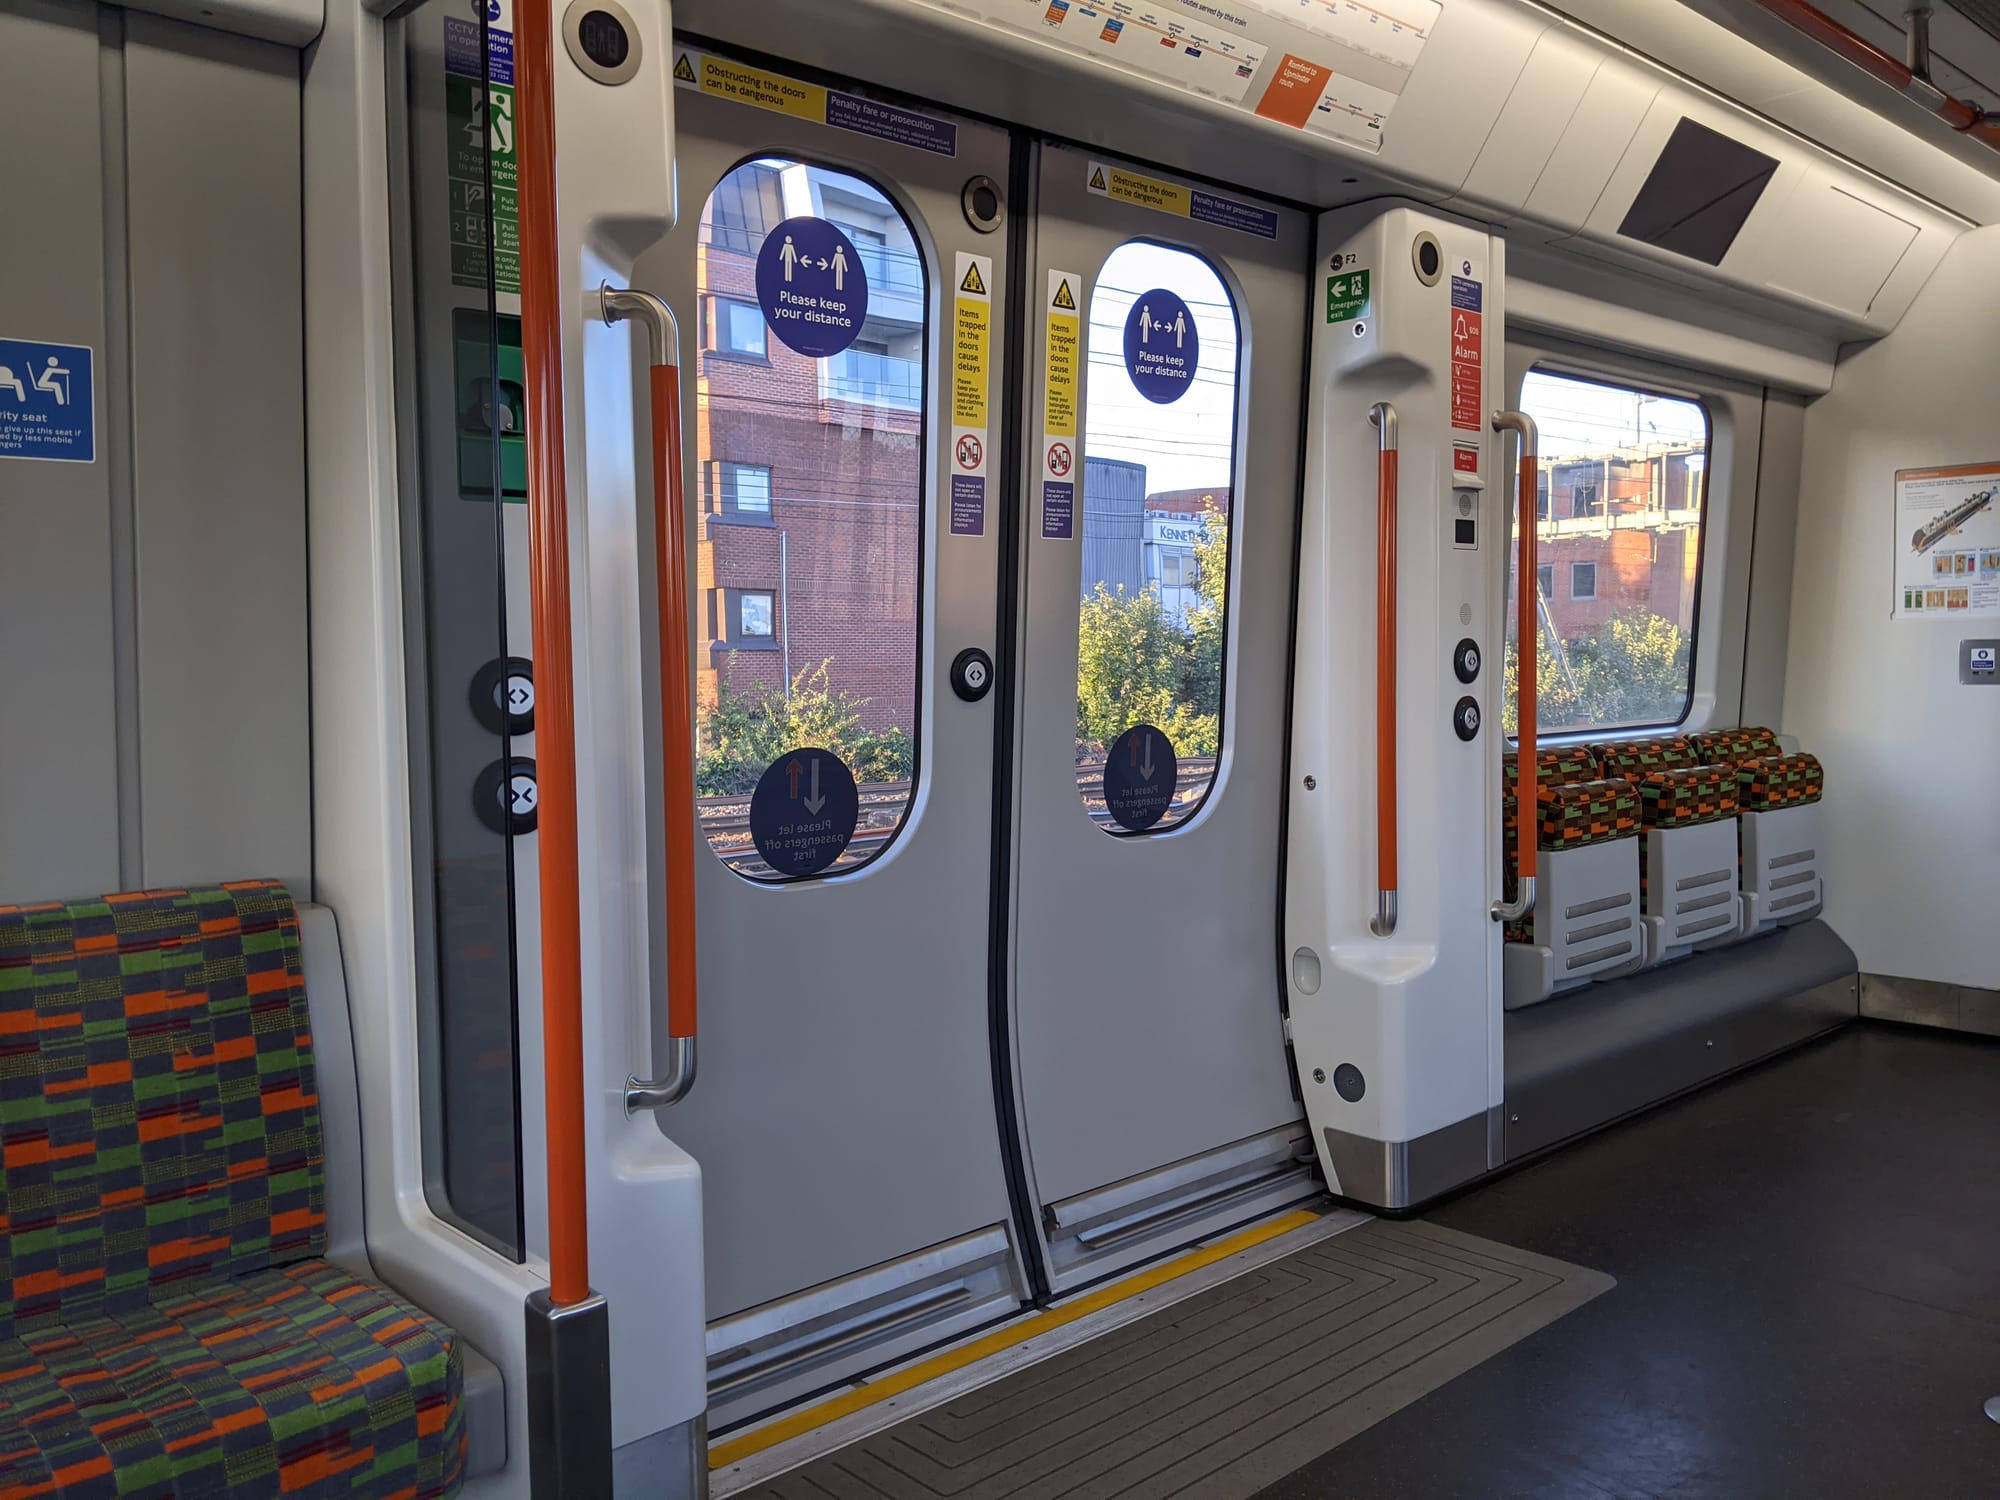 On the inside, the doors are coloured grey. There are bright orange handrails either side of the door. Next to them are door control buttons. Above the door is a map of the network.